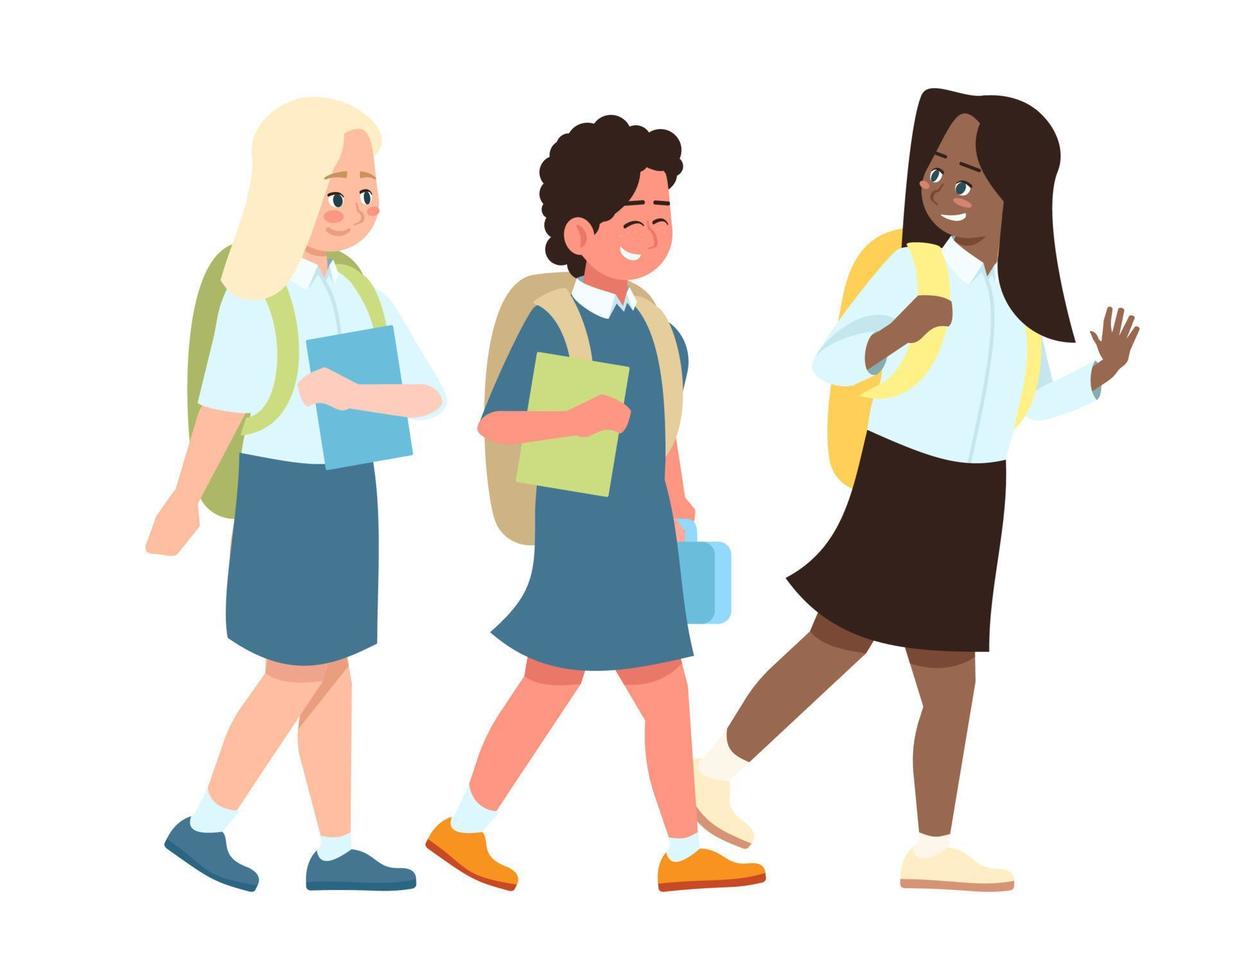 Multiracial schoolkids saying goodbye flat vector illustration. Happy multicultural schoolmates greeting isolated on white cartoon characters. Caucasian, dark skinned schoolchildren going to school